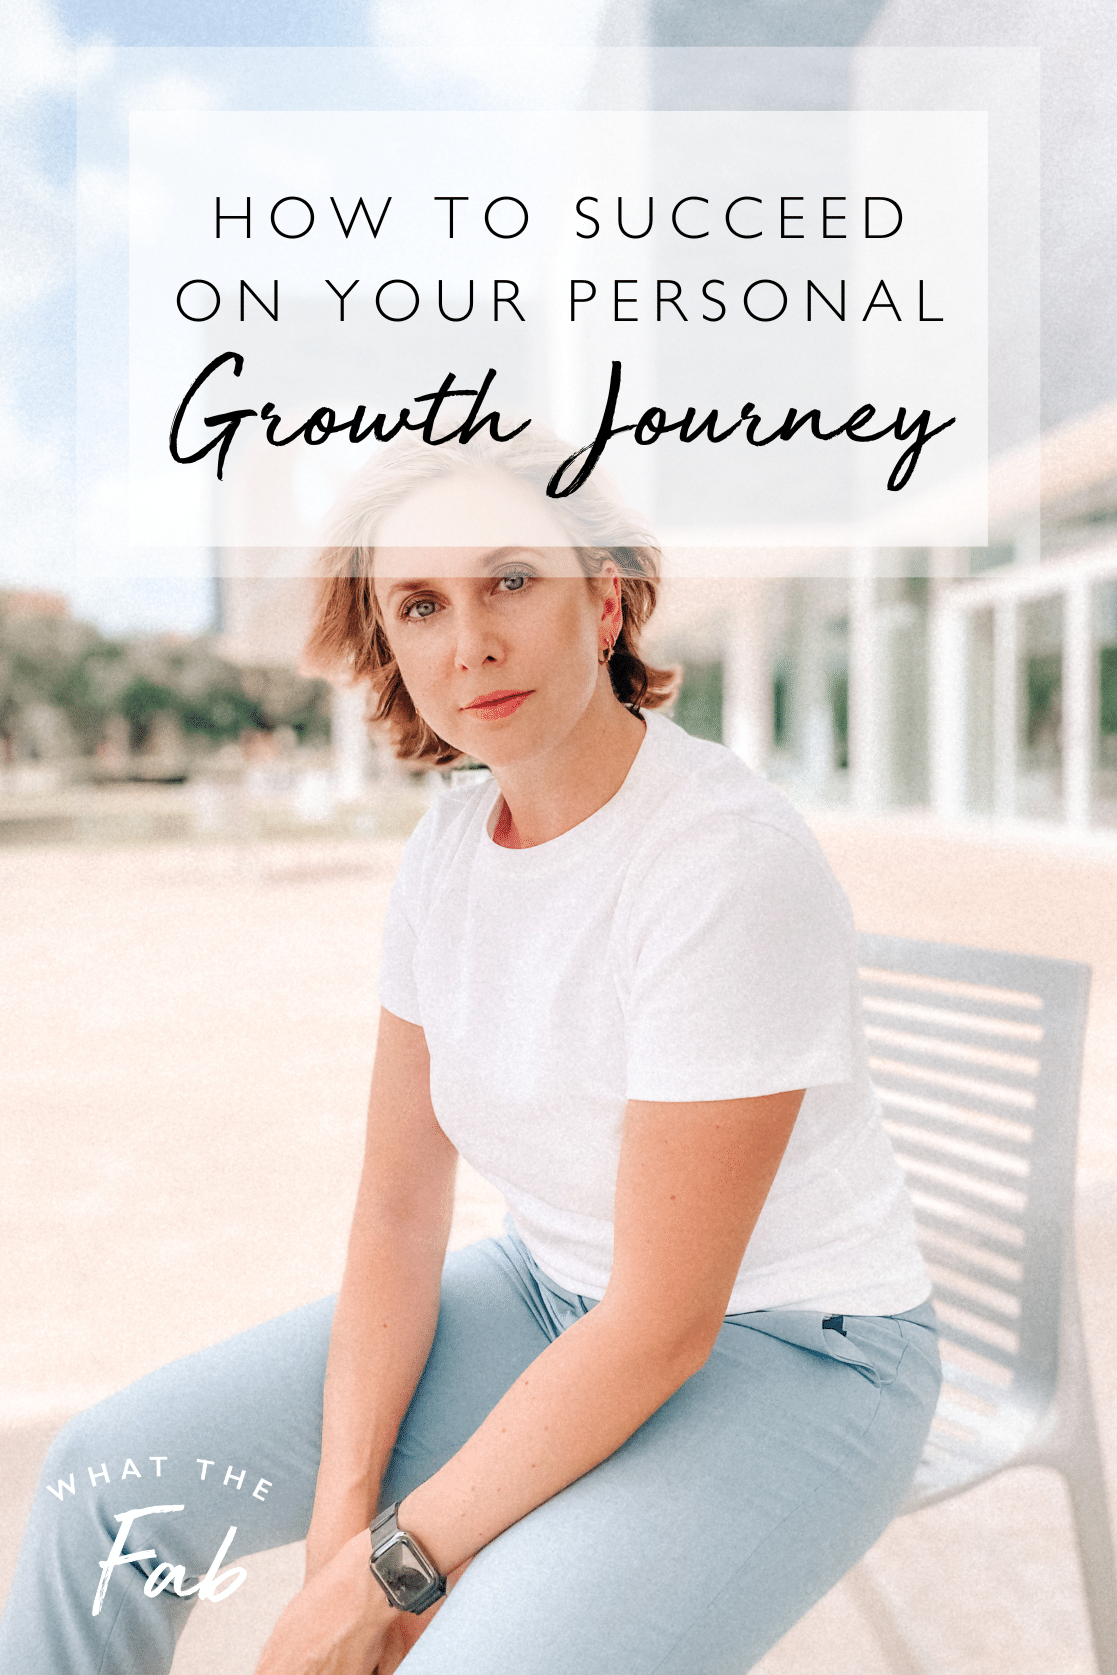 How to succeed on your personal growth journey